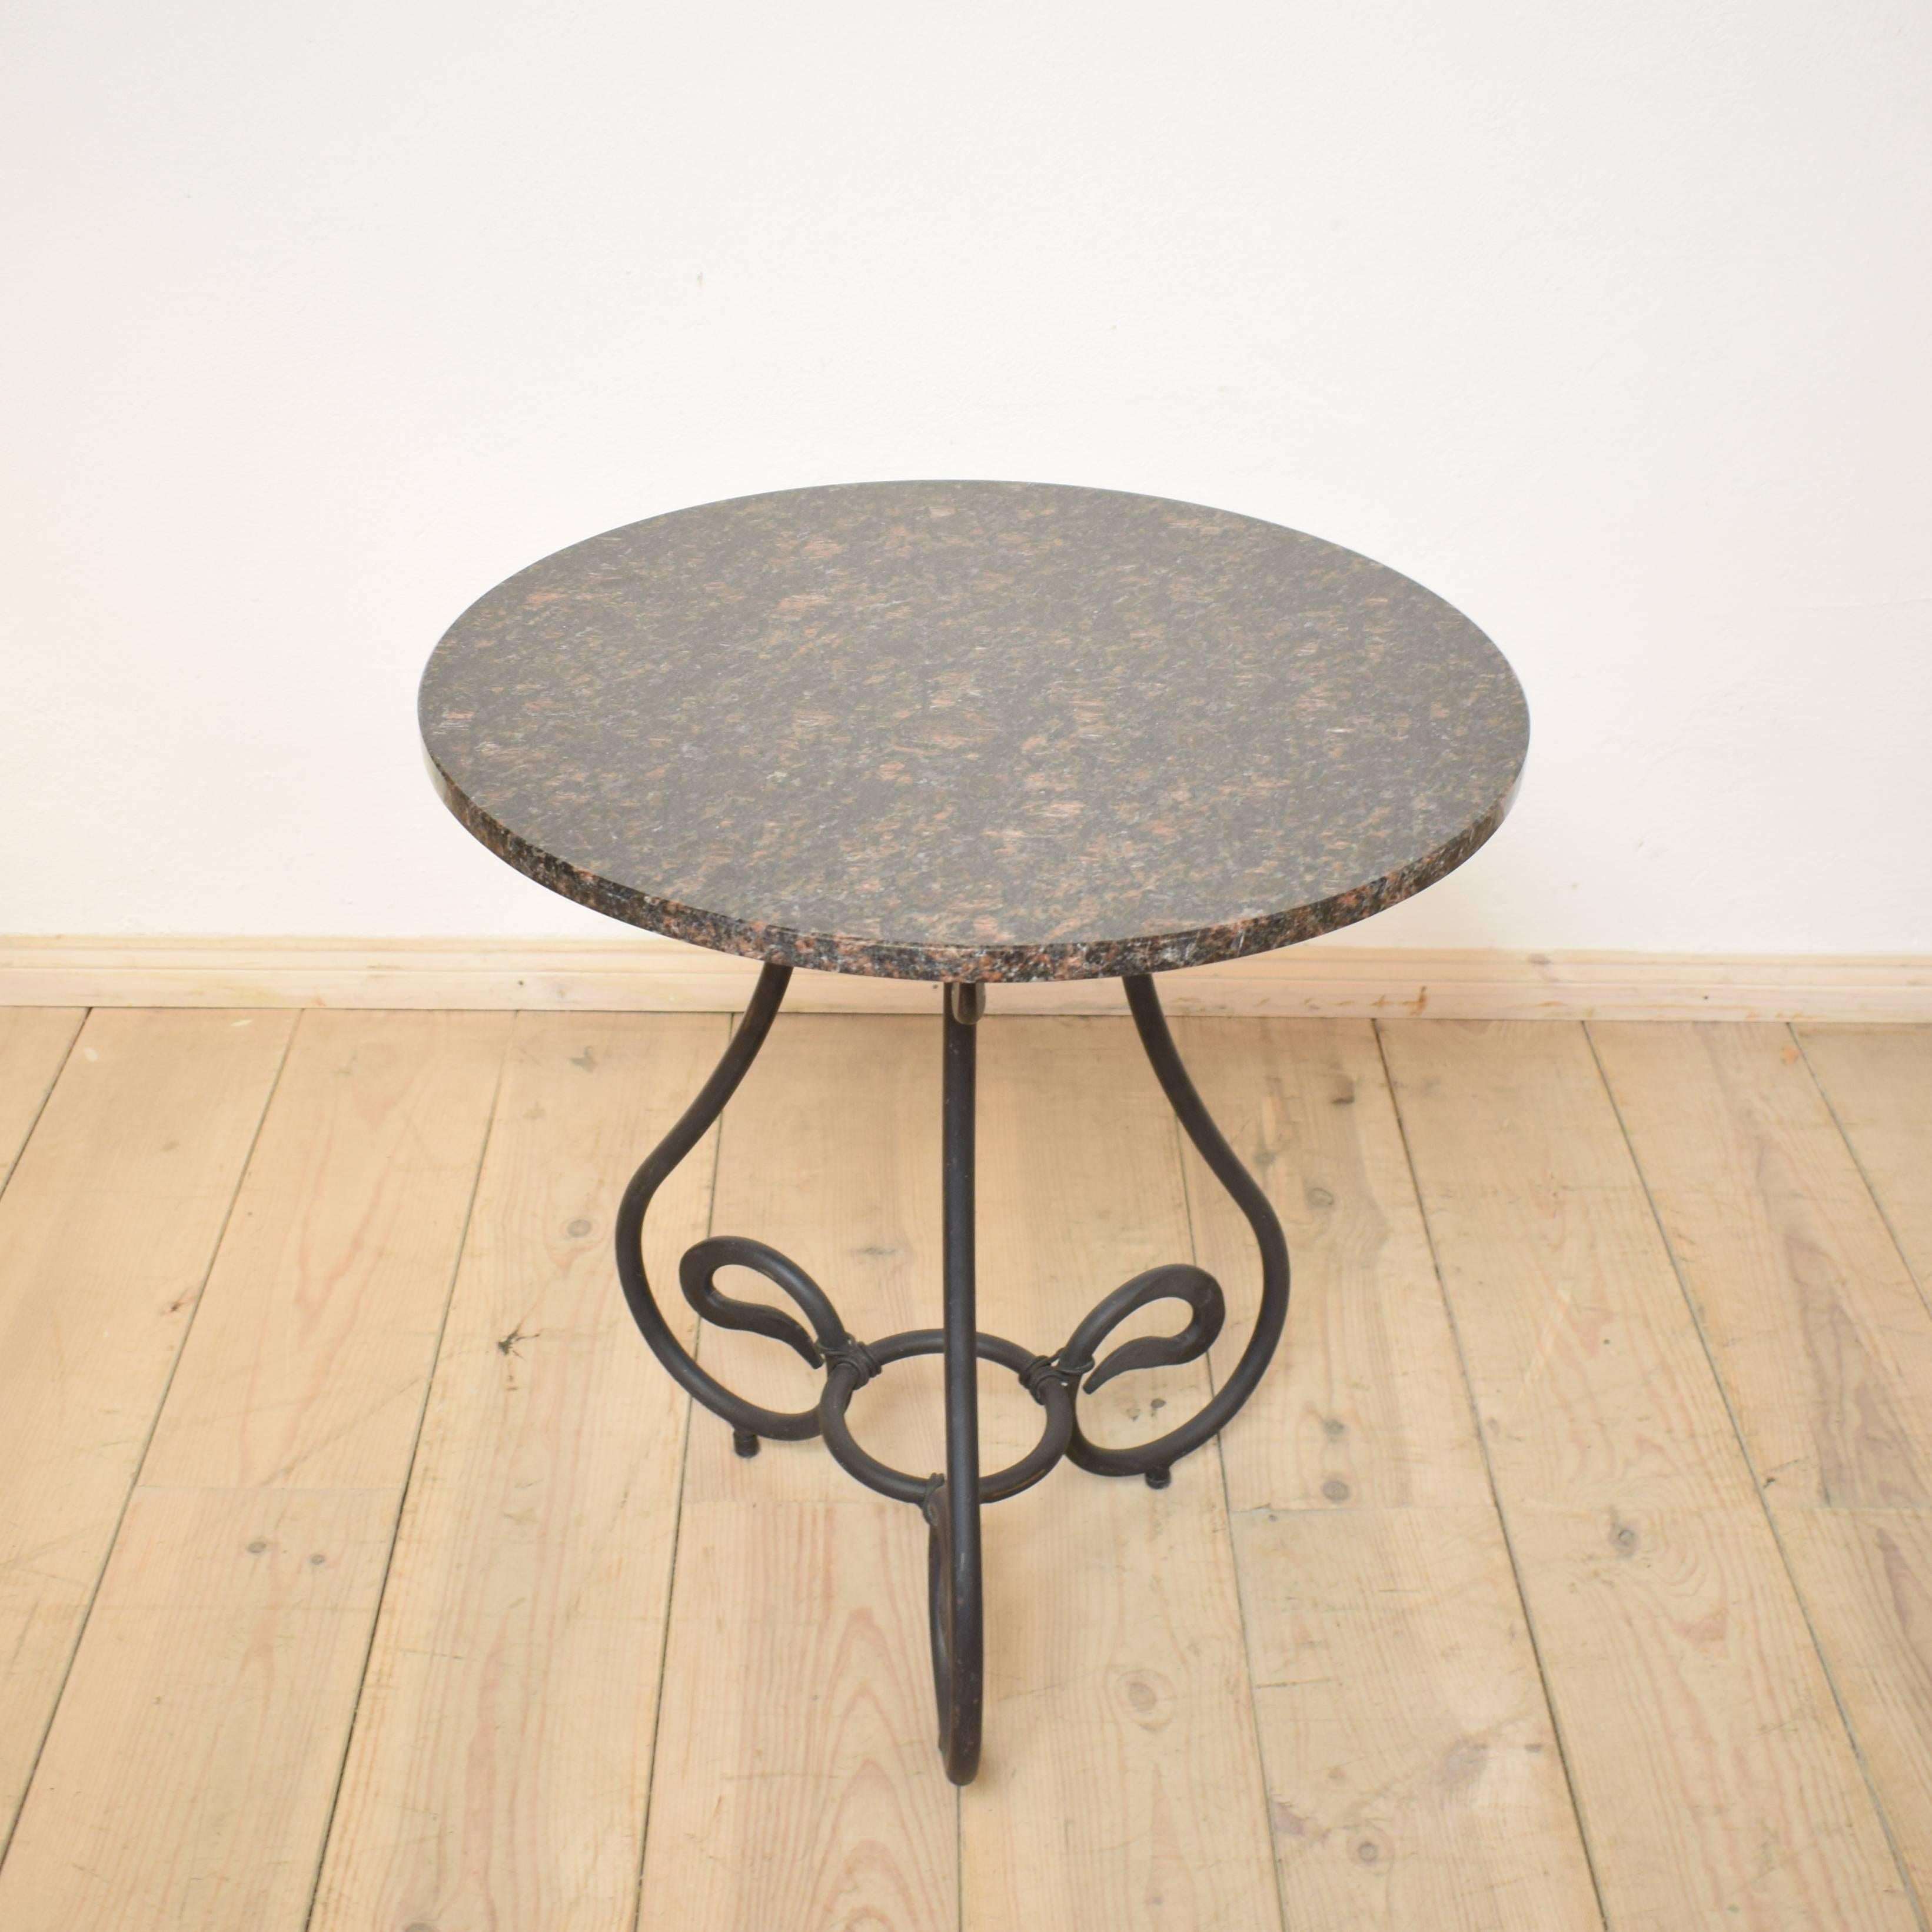 Mid-20th Century 1950s Black Forged Iron Side Table with Granite Top